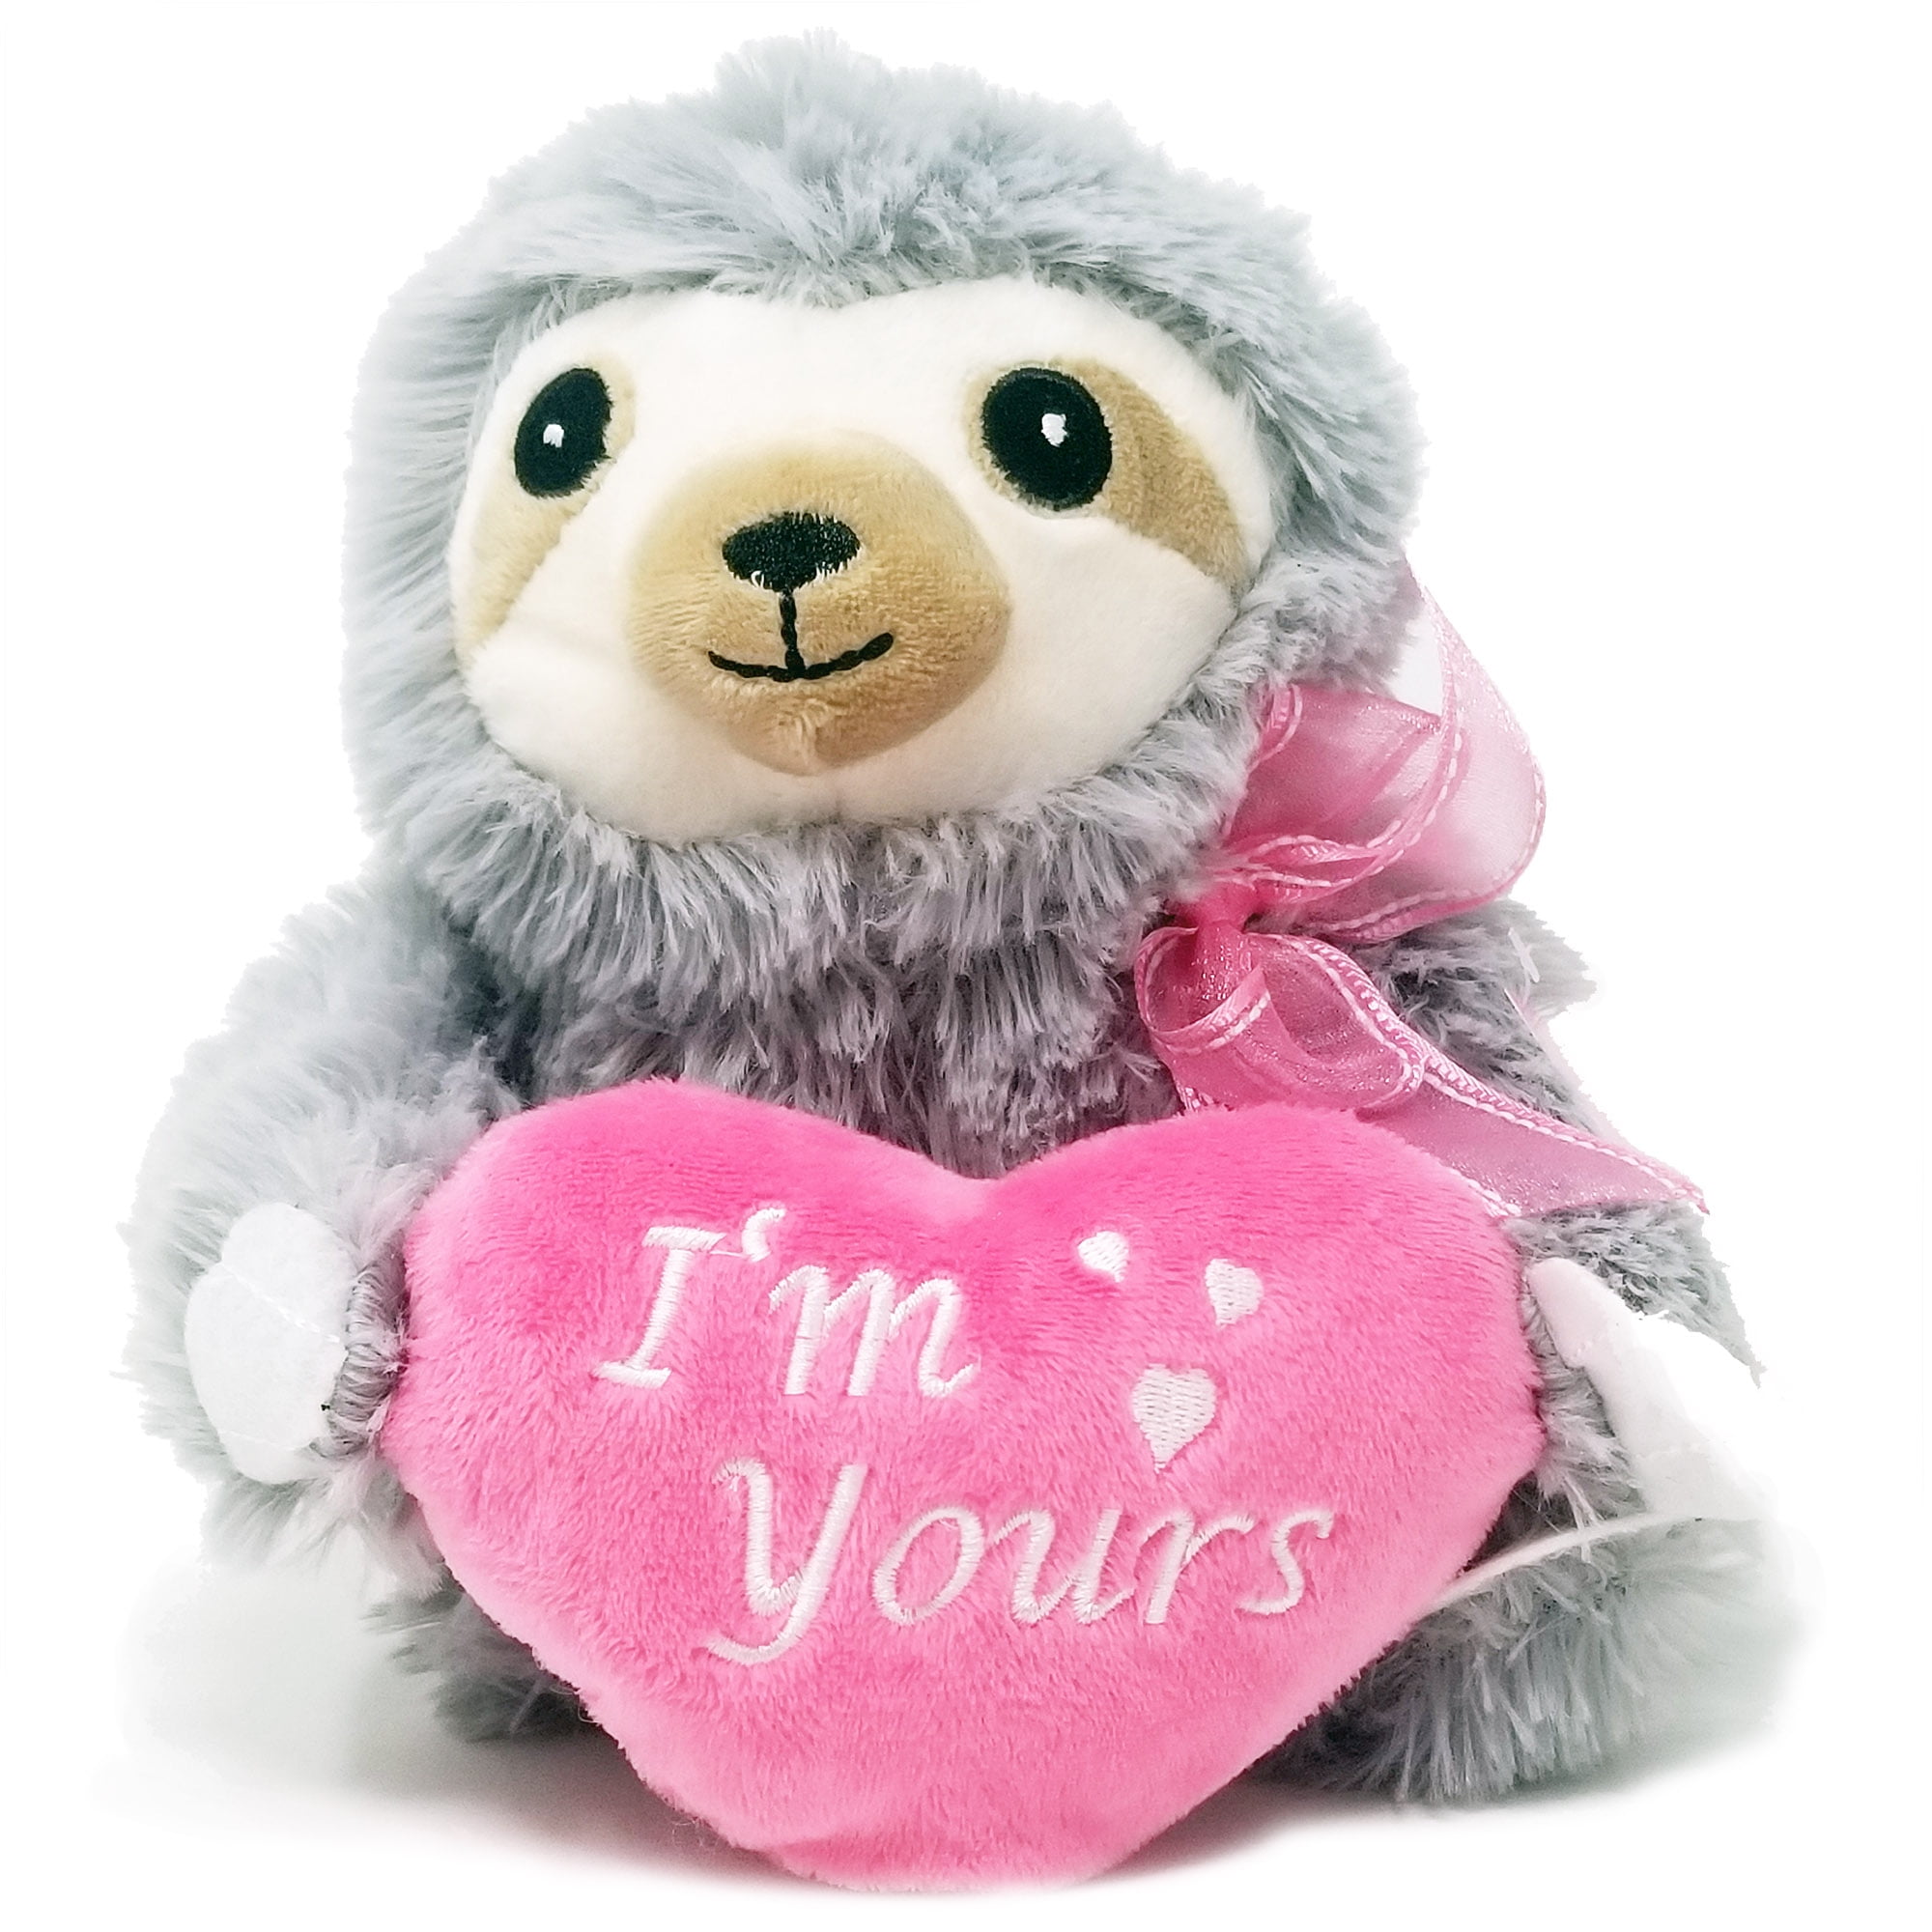 Sloth Stuffed Animal Valentines Day Gift Cute Sloth Birthday Gifts for Kids Gray 16 Inch 